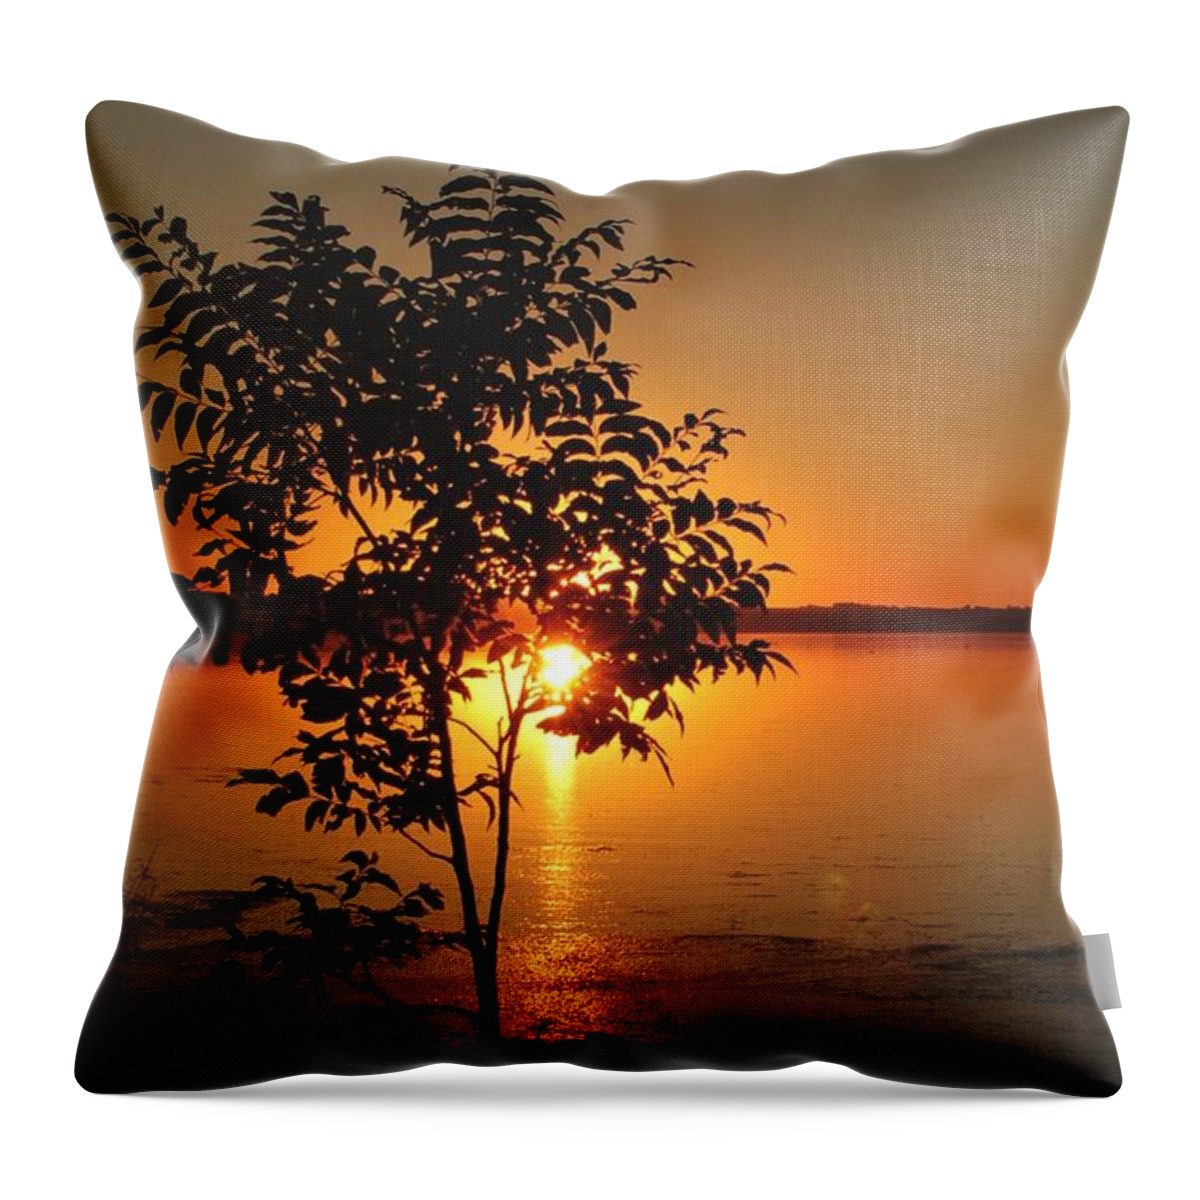 Sunset Throw Pillow featuring the digital art Sunset Painting by Sandra J's